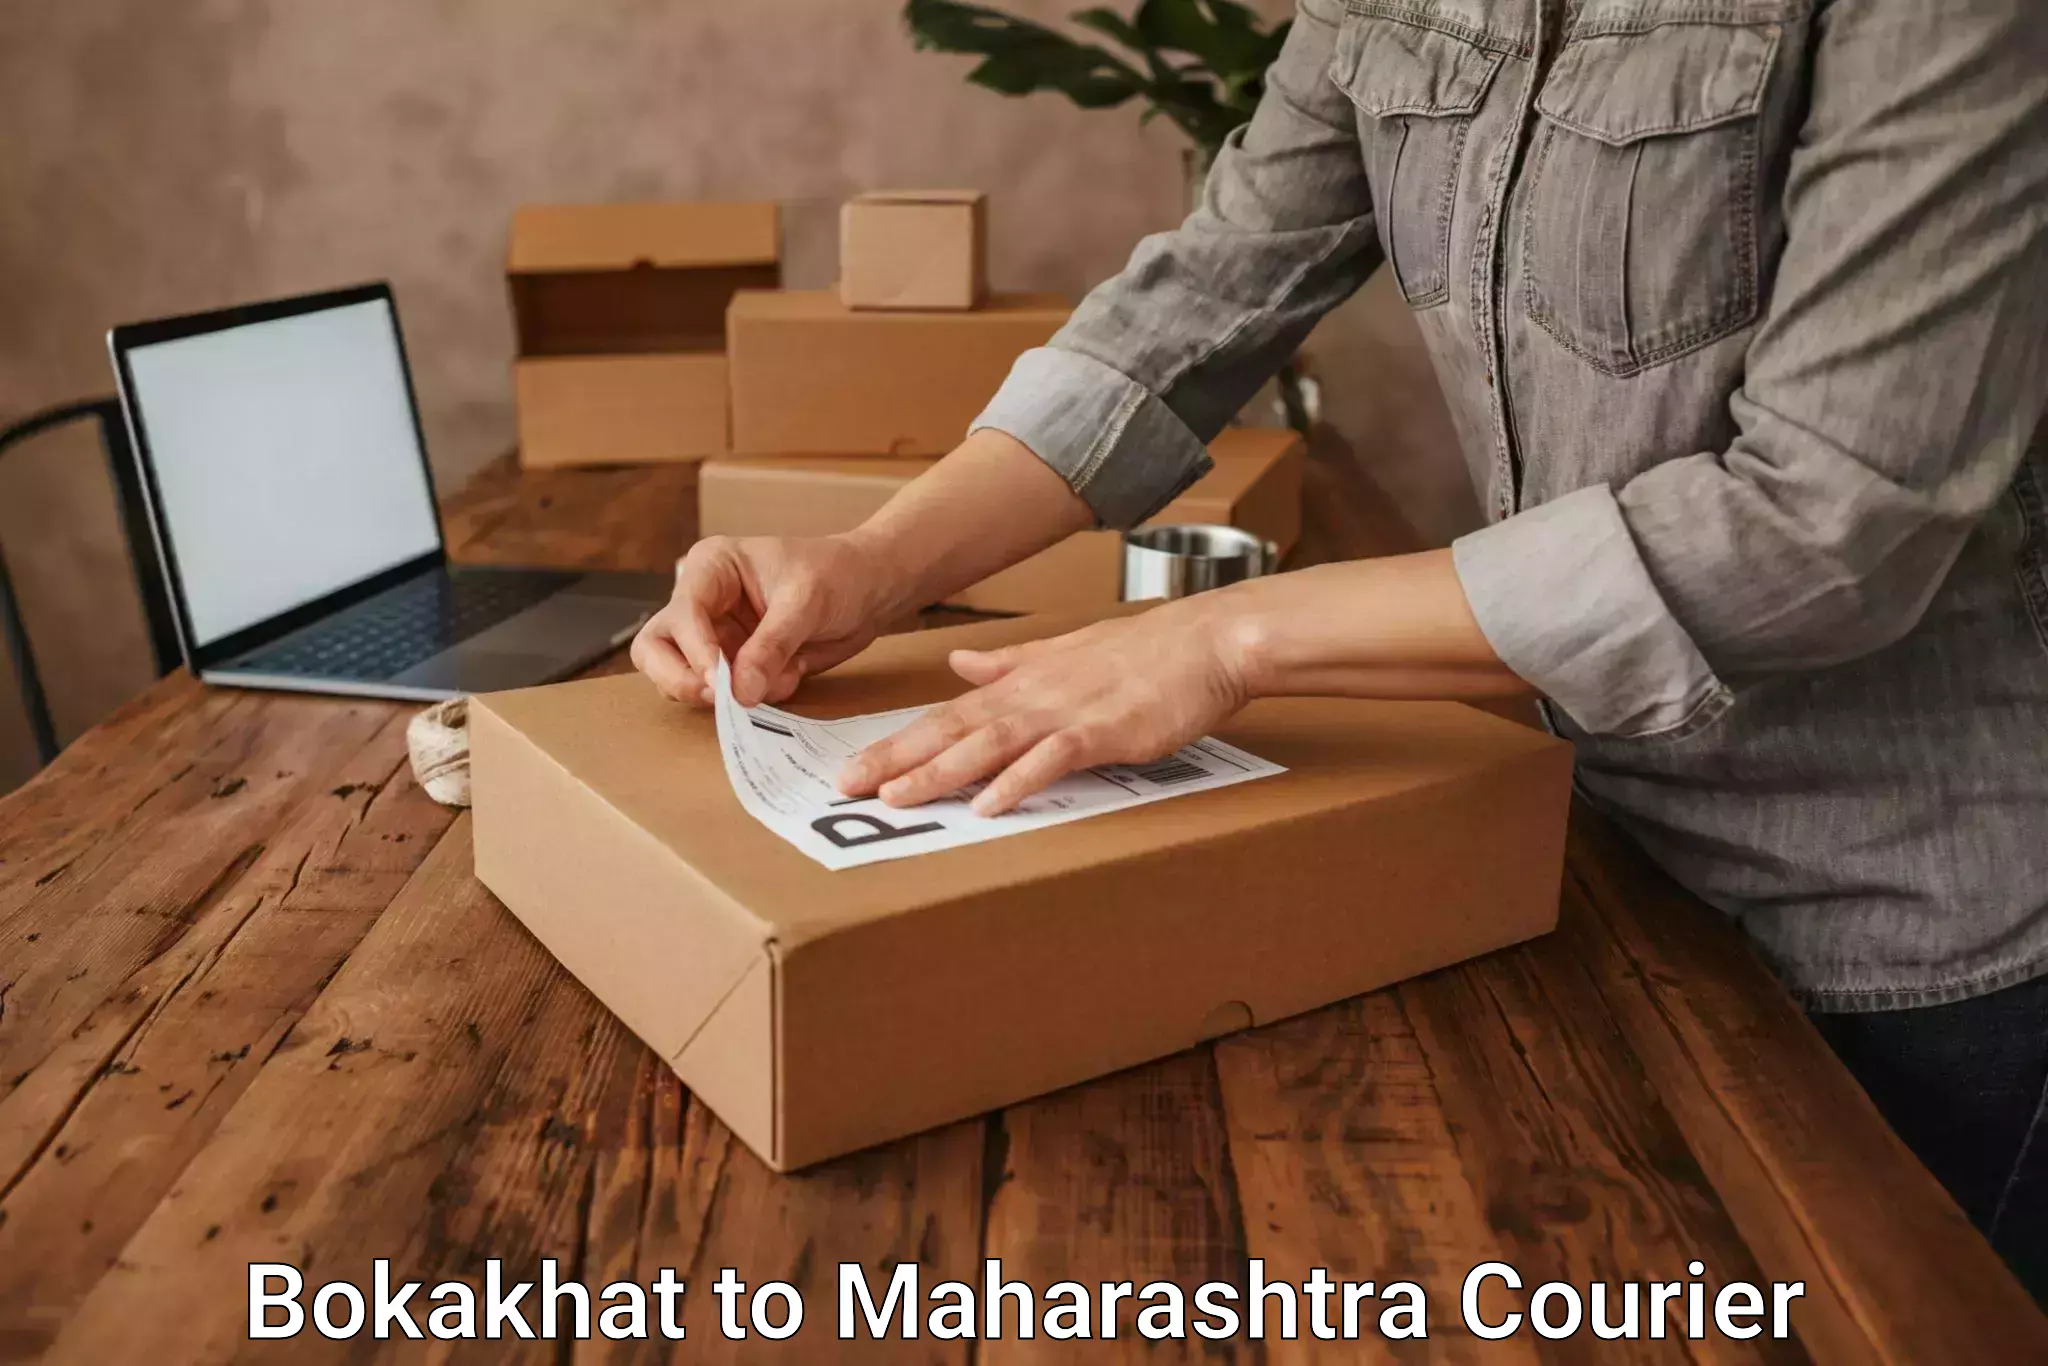 24-hour courier service Bokakhat to Dhule